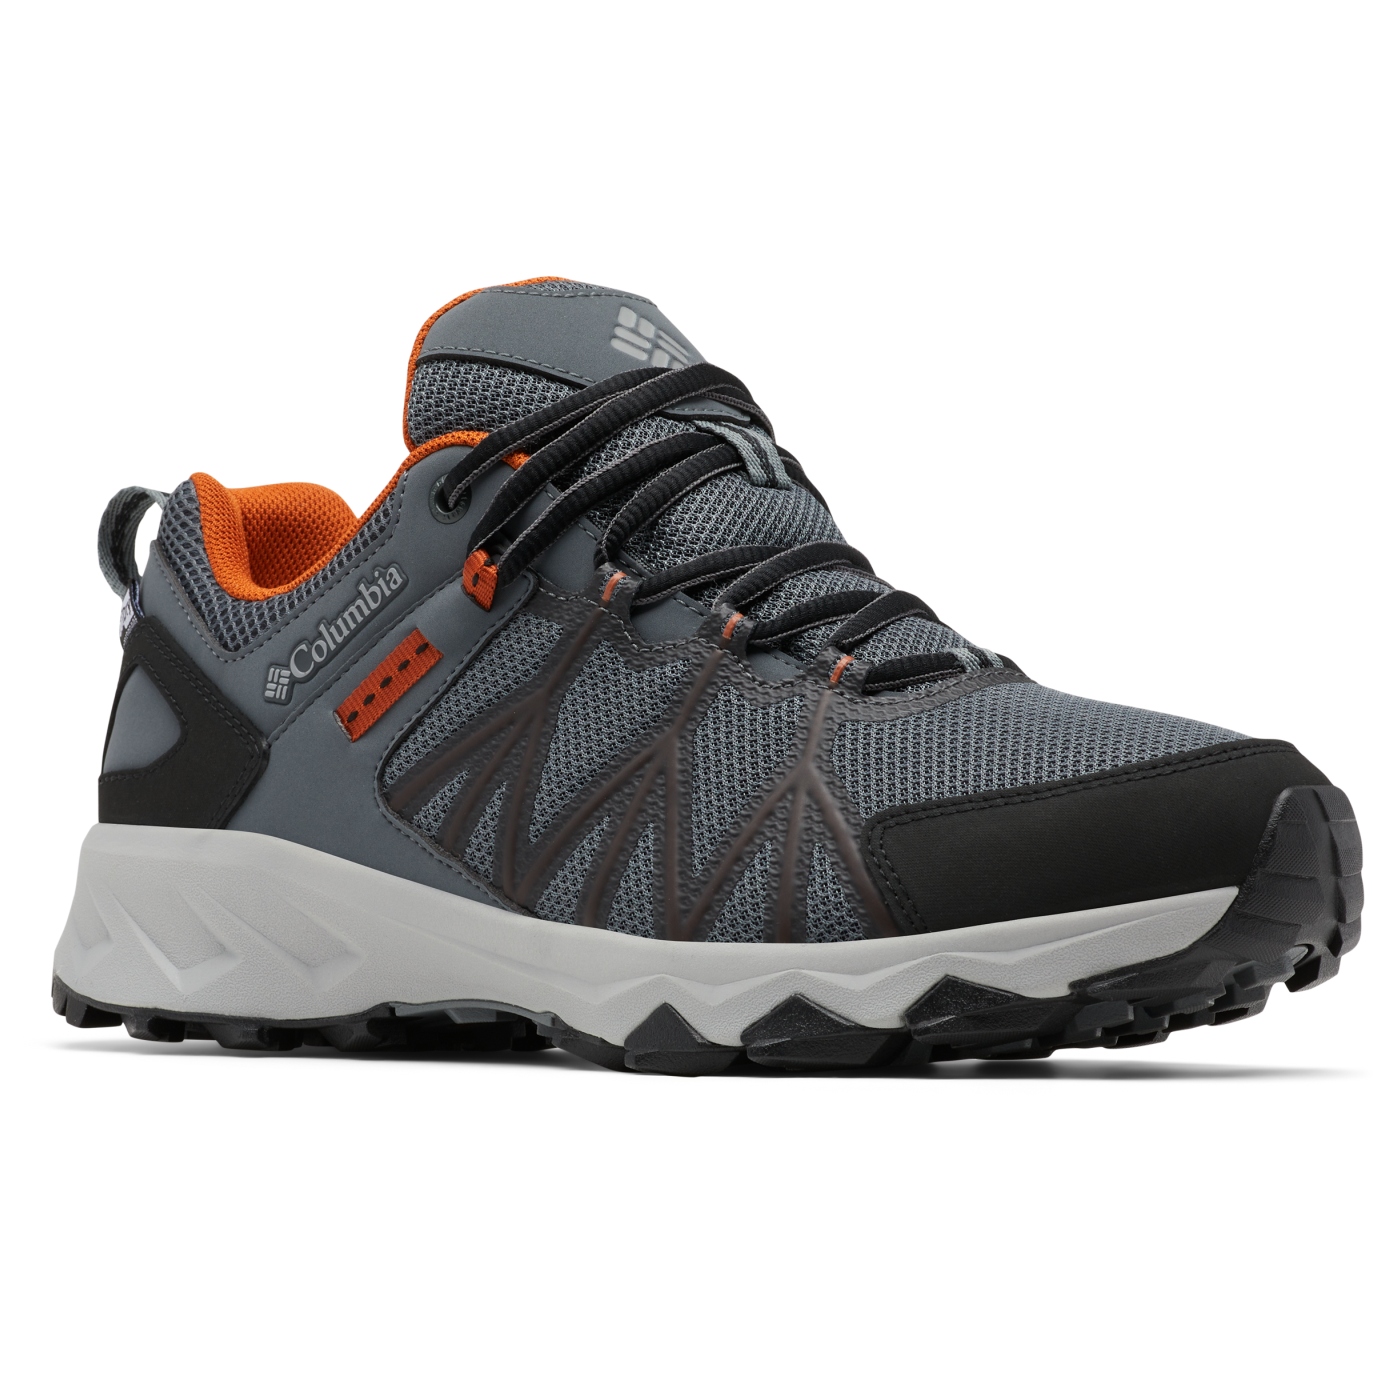 Picture of Columbia Peakfreak II Outdry Hiking Shoes Men - Graphite/Warm Copper